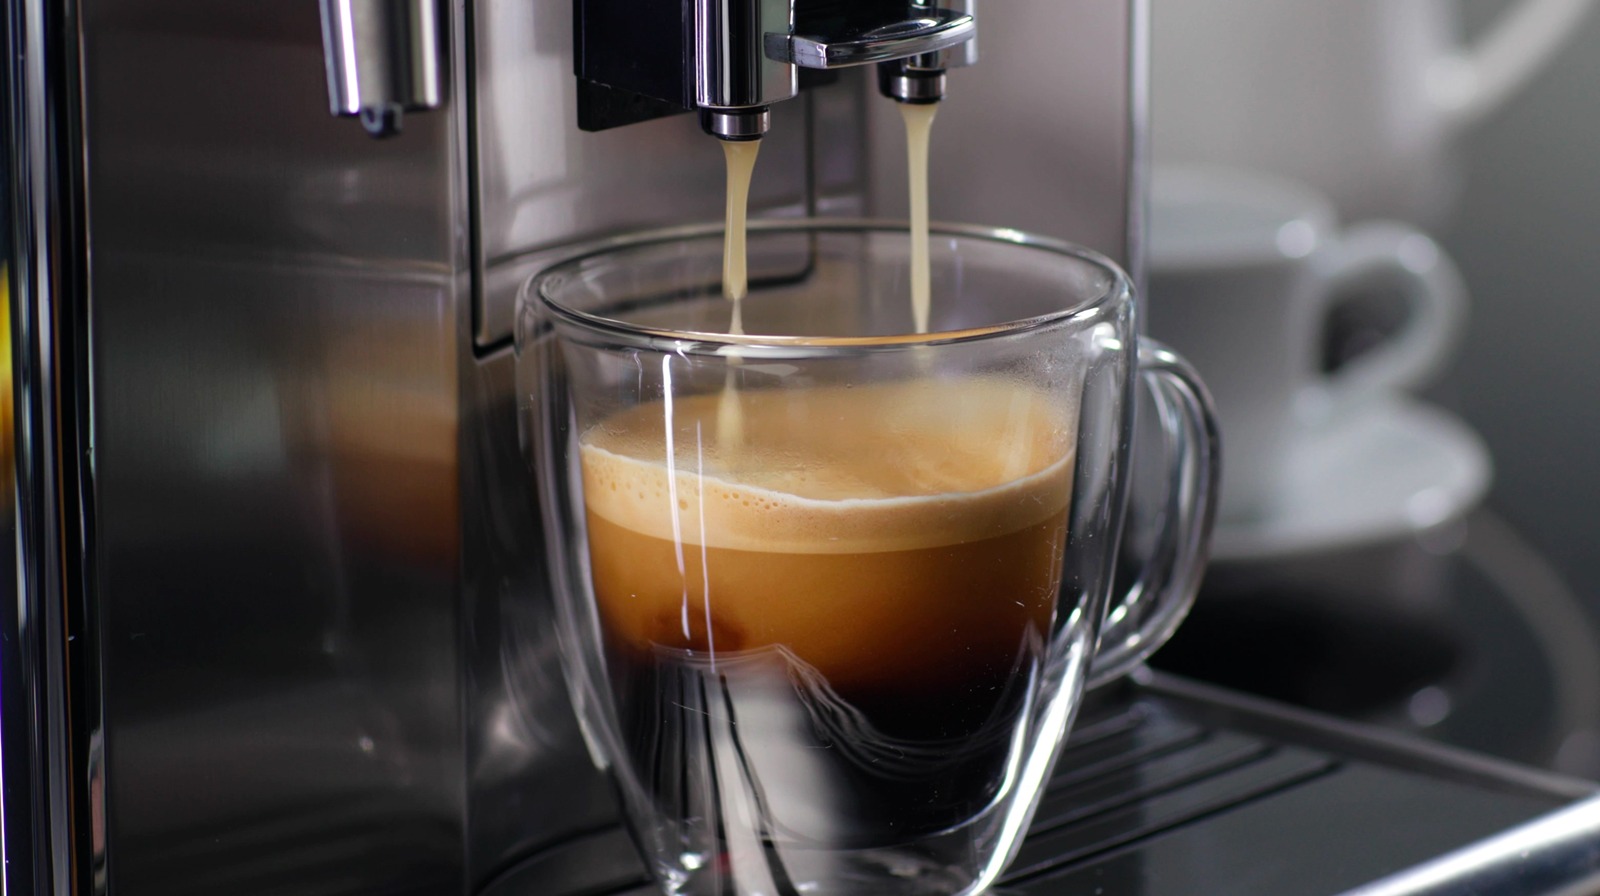 What Is A Dead Espresso Shot And How Do You Avoid It?